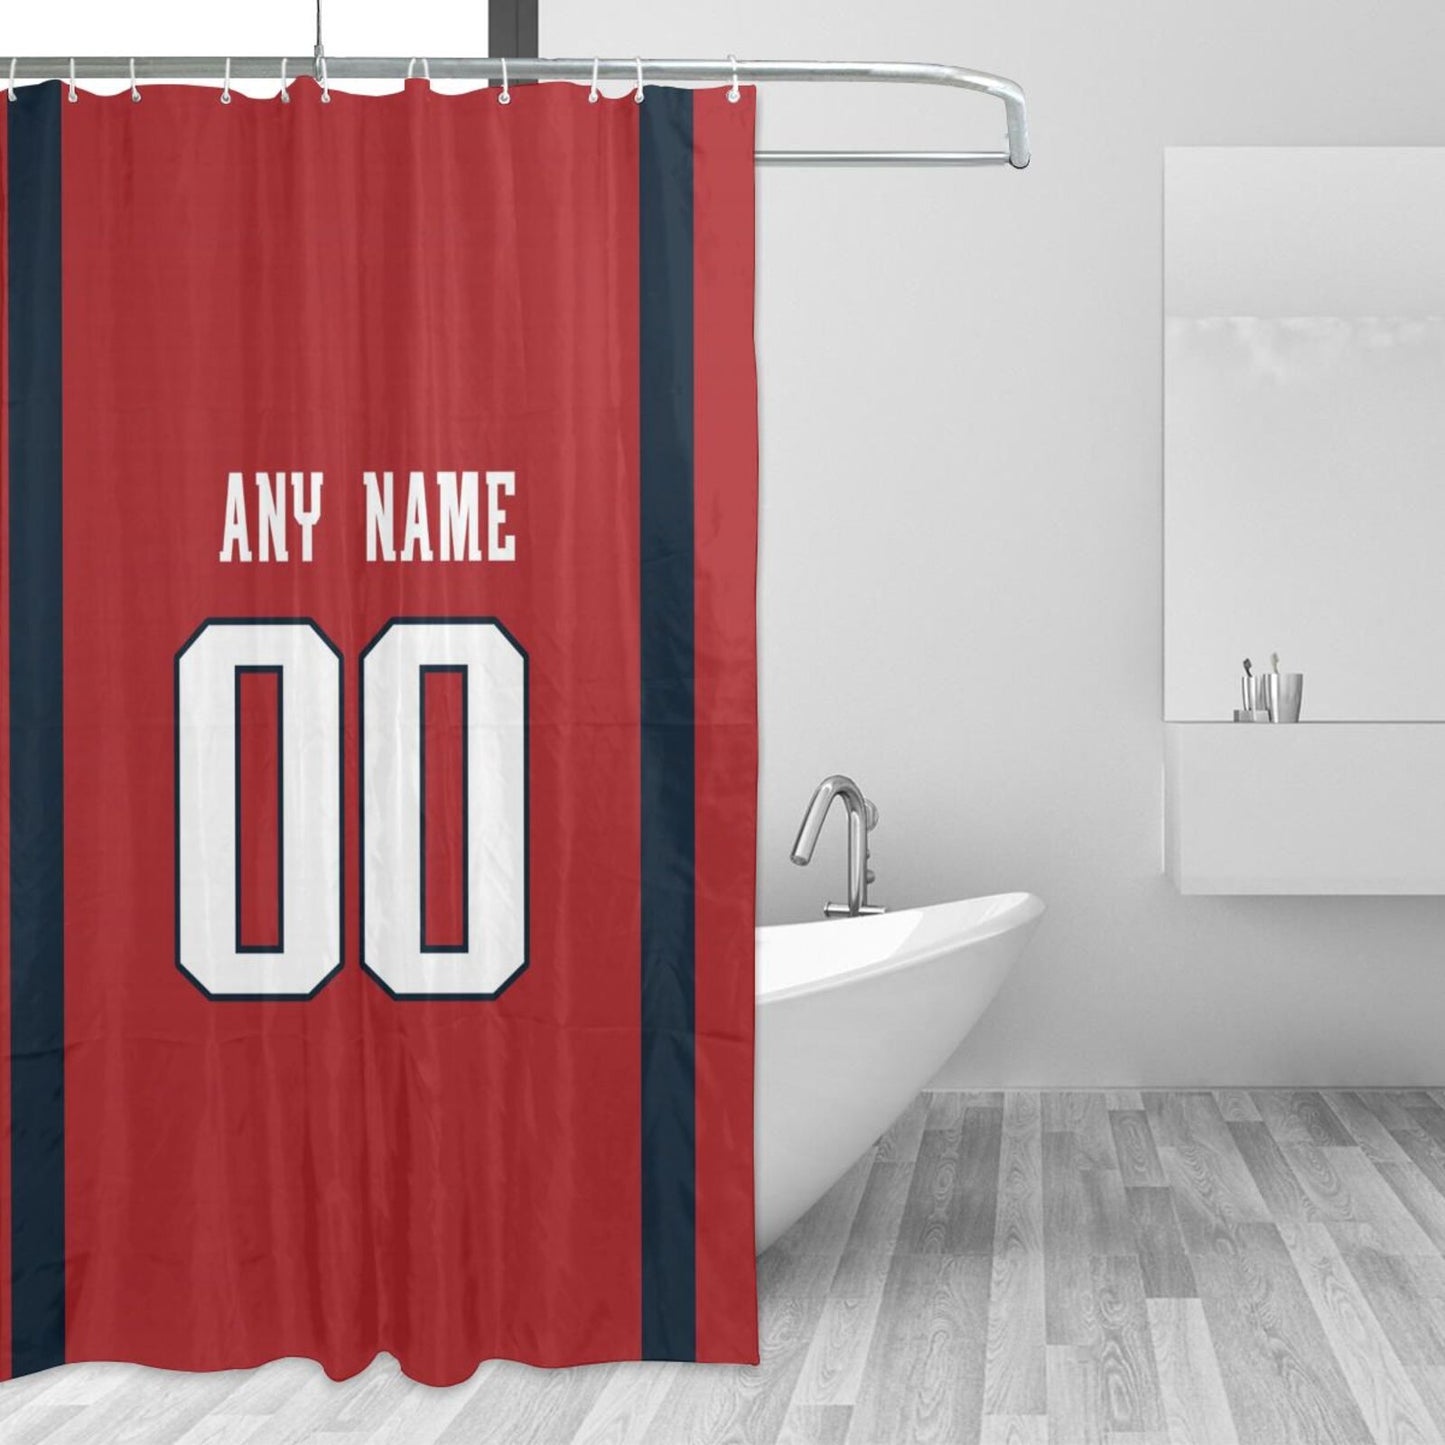 Custom Football New England Patriots style personalized shower curtain custom design name and number set of 12 shower curtain hooks Rings